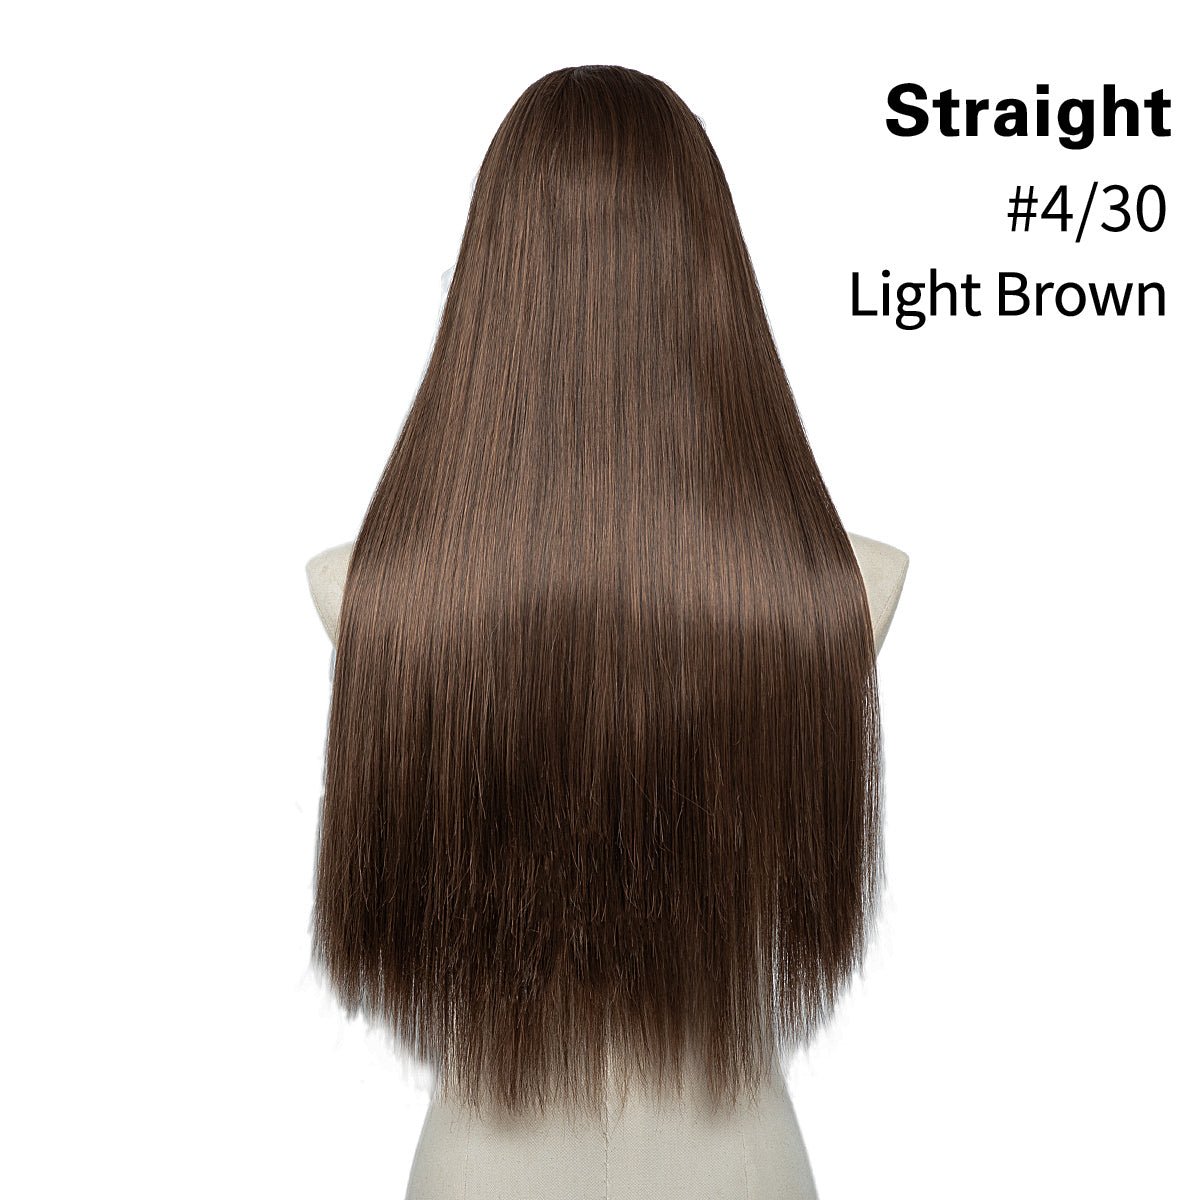 U Part Clip in Hair Extension 16 20 24 inch - Beauty Bello